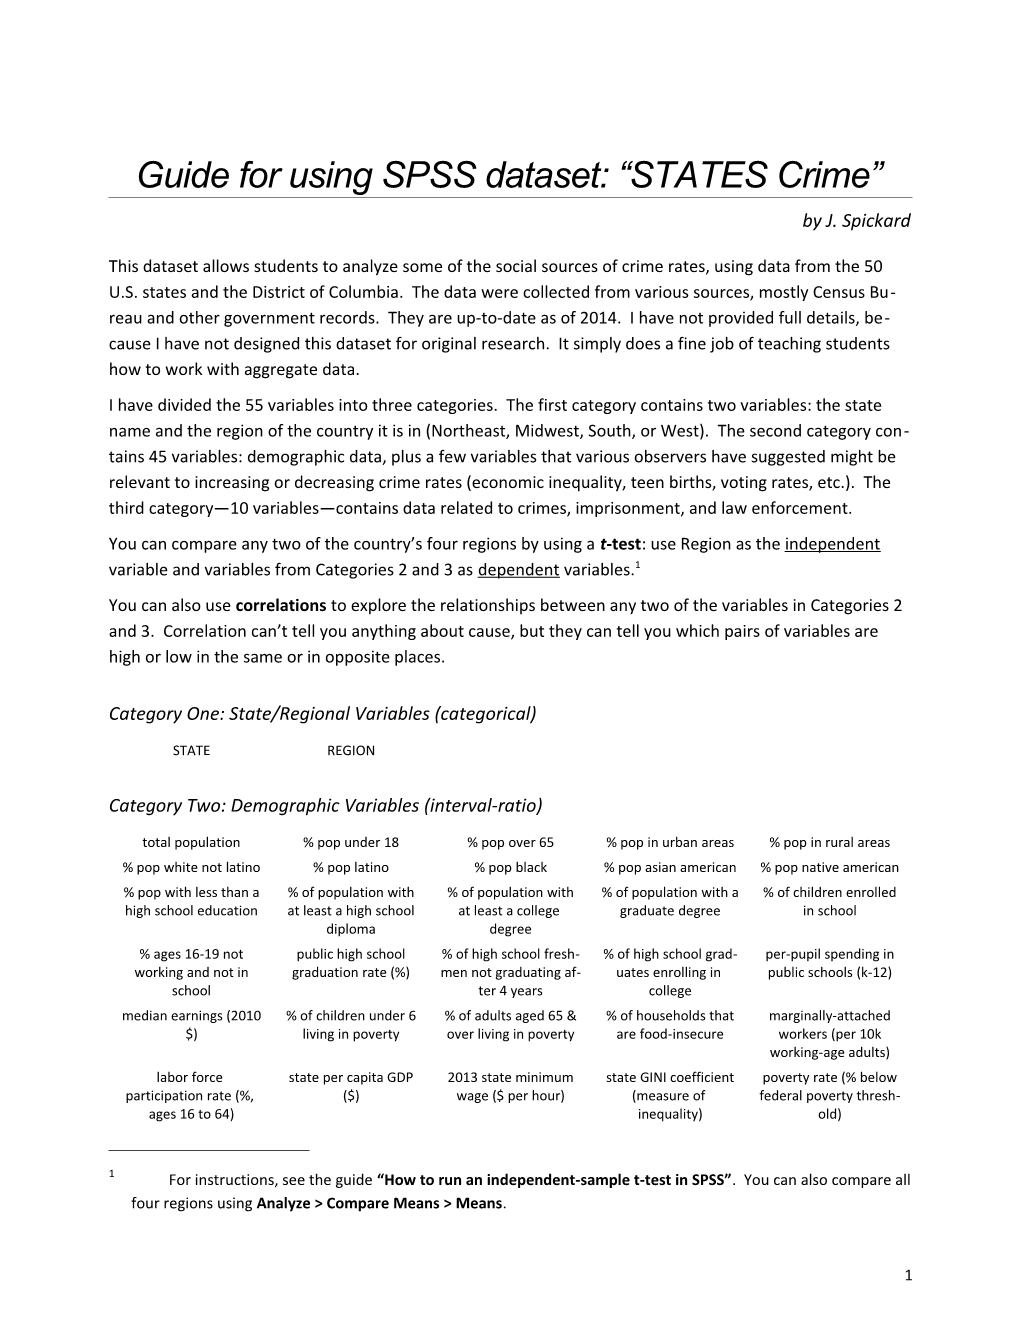 Guide for Using the SPSS Dataset STATES Crime